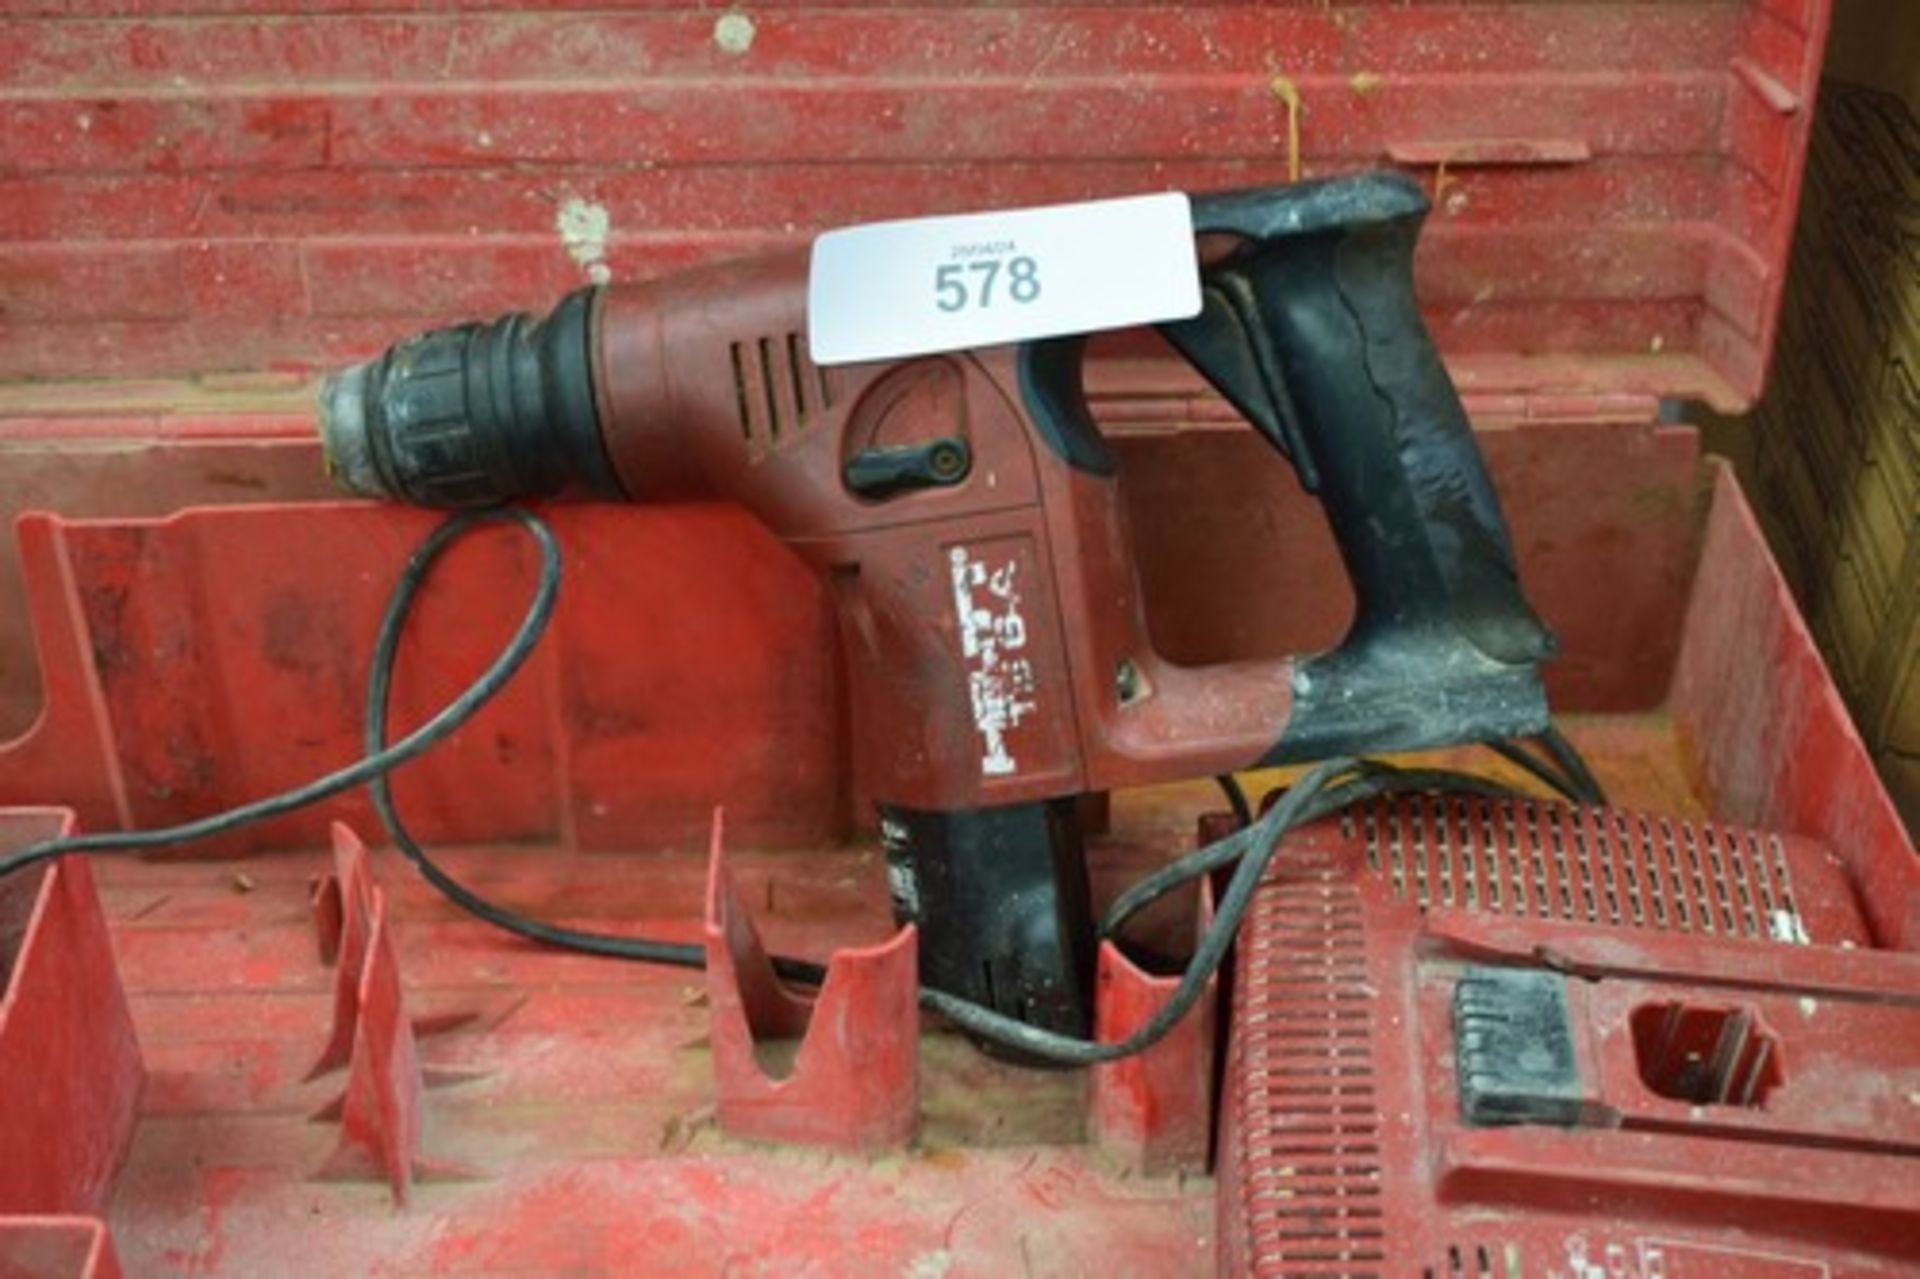 1 x Hilti cordless hammer drill, model: TE 6-A, 36v 12amp and charger - working and original red - Image 2 of 2